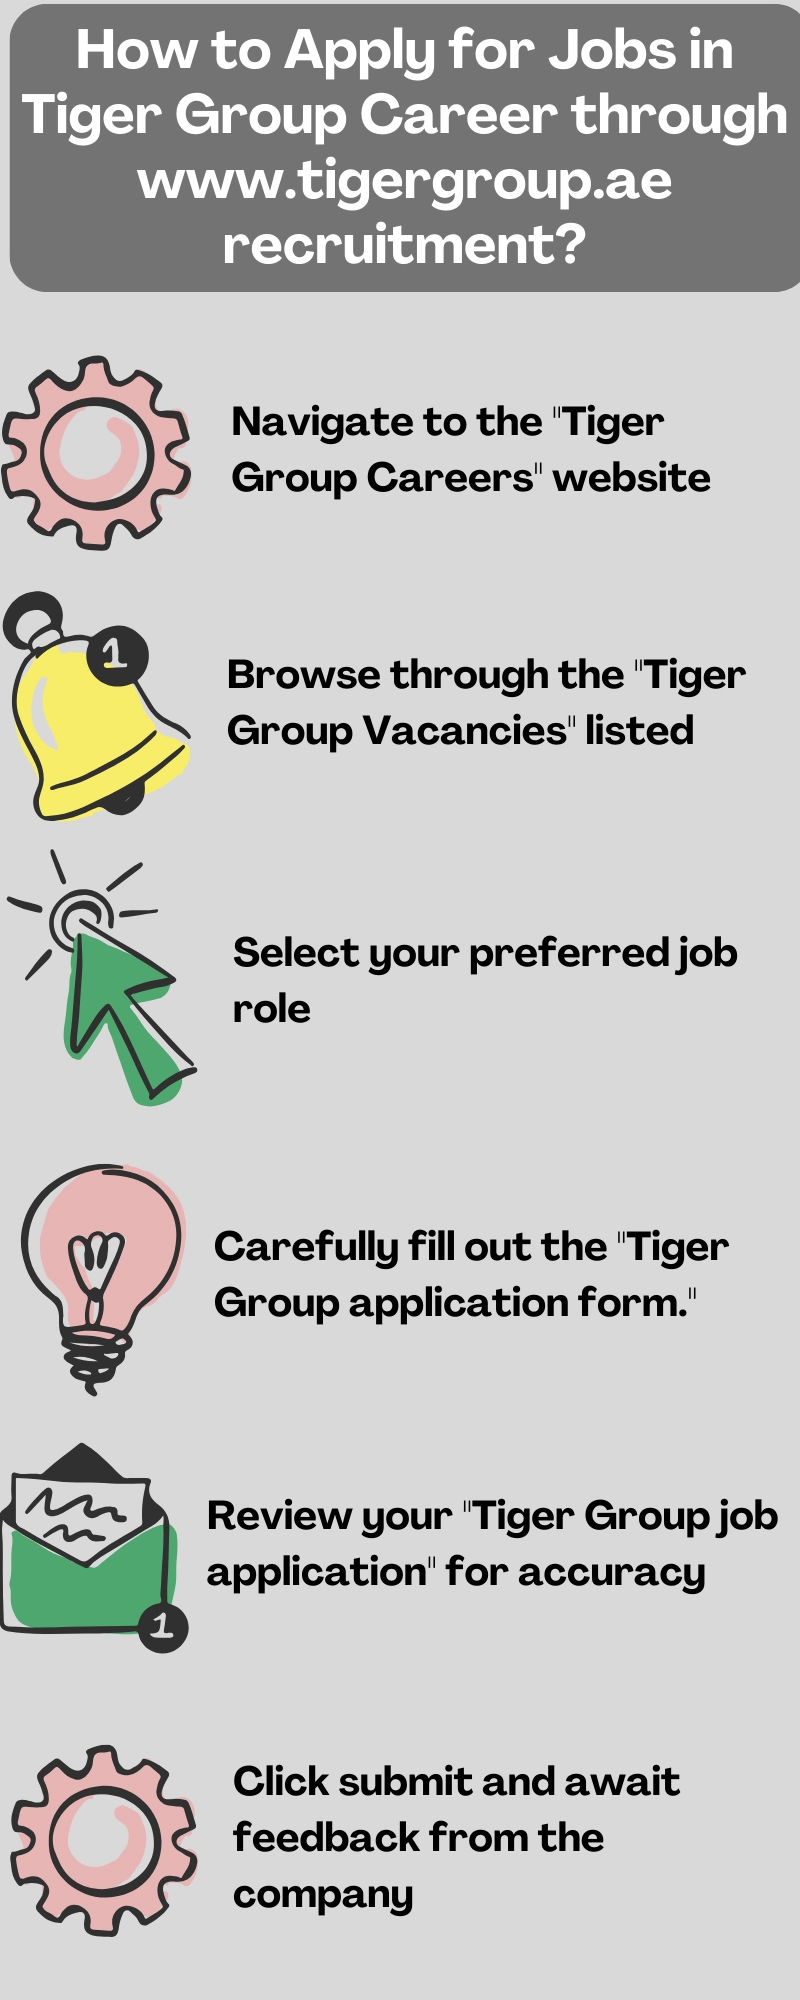 How to Apply for Jobs in Tiger Group Career through www.tigergroup.ae recruitment?